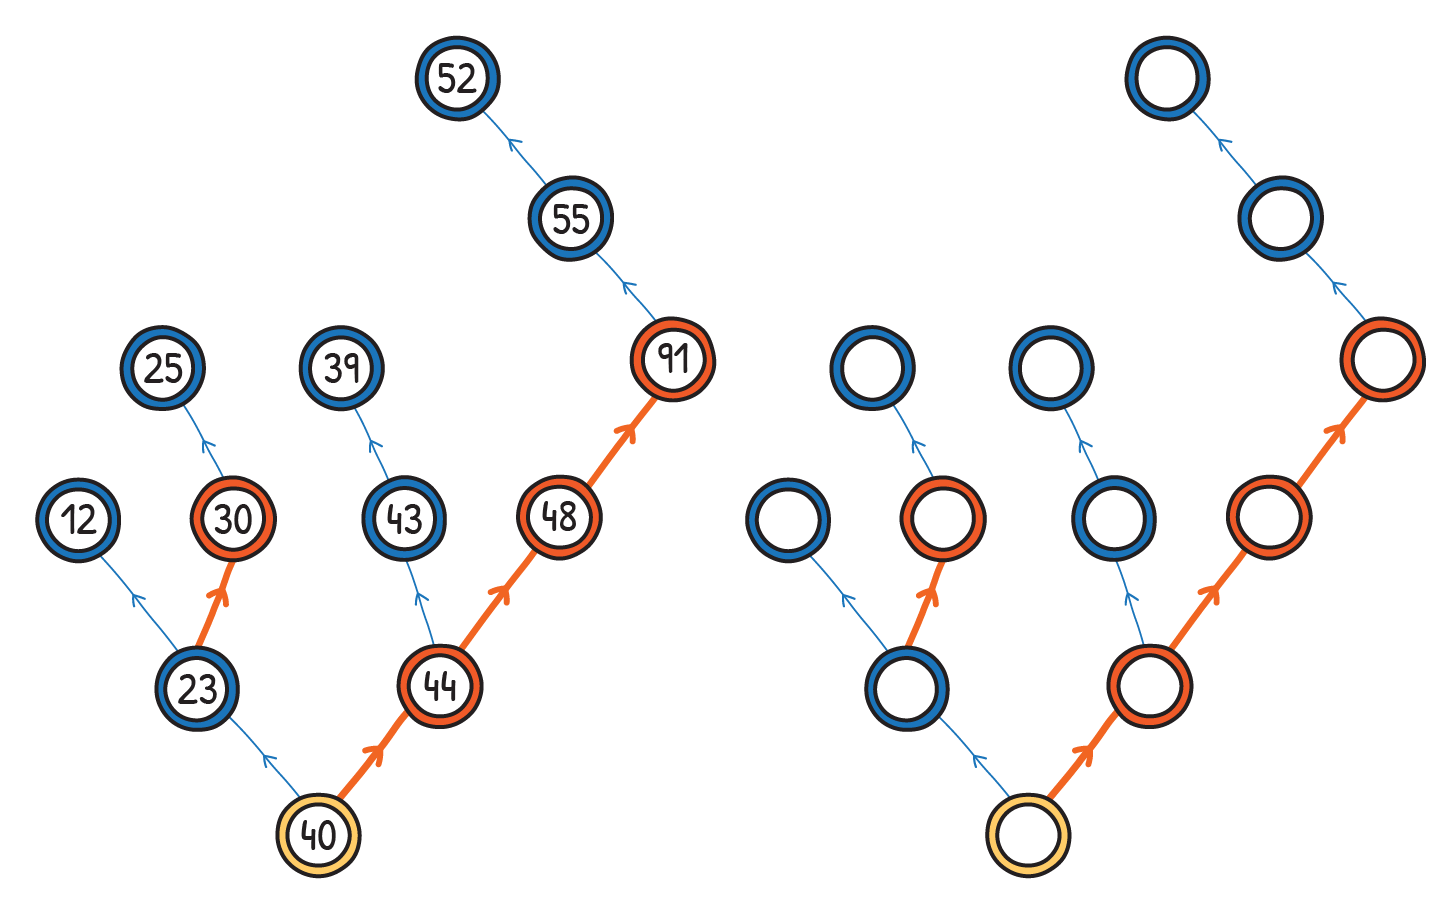 Two binary search trees. One with numbers in the nodes and one without.